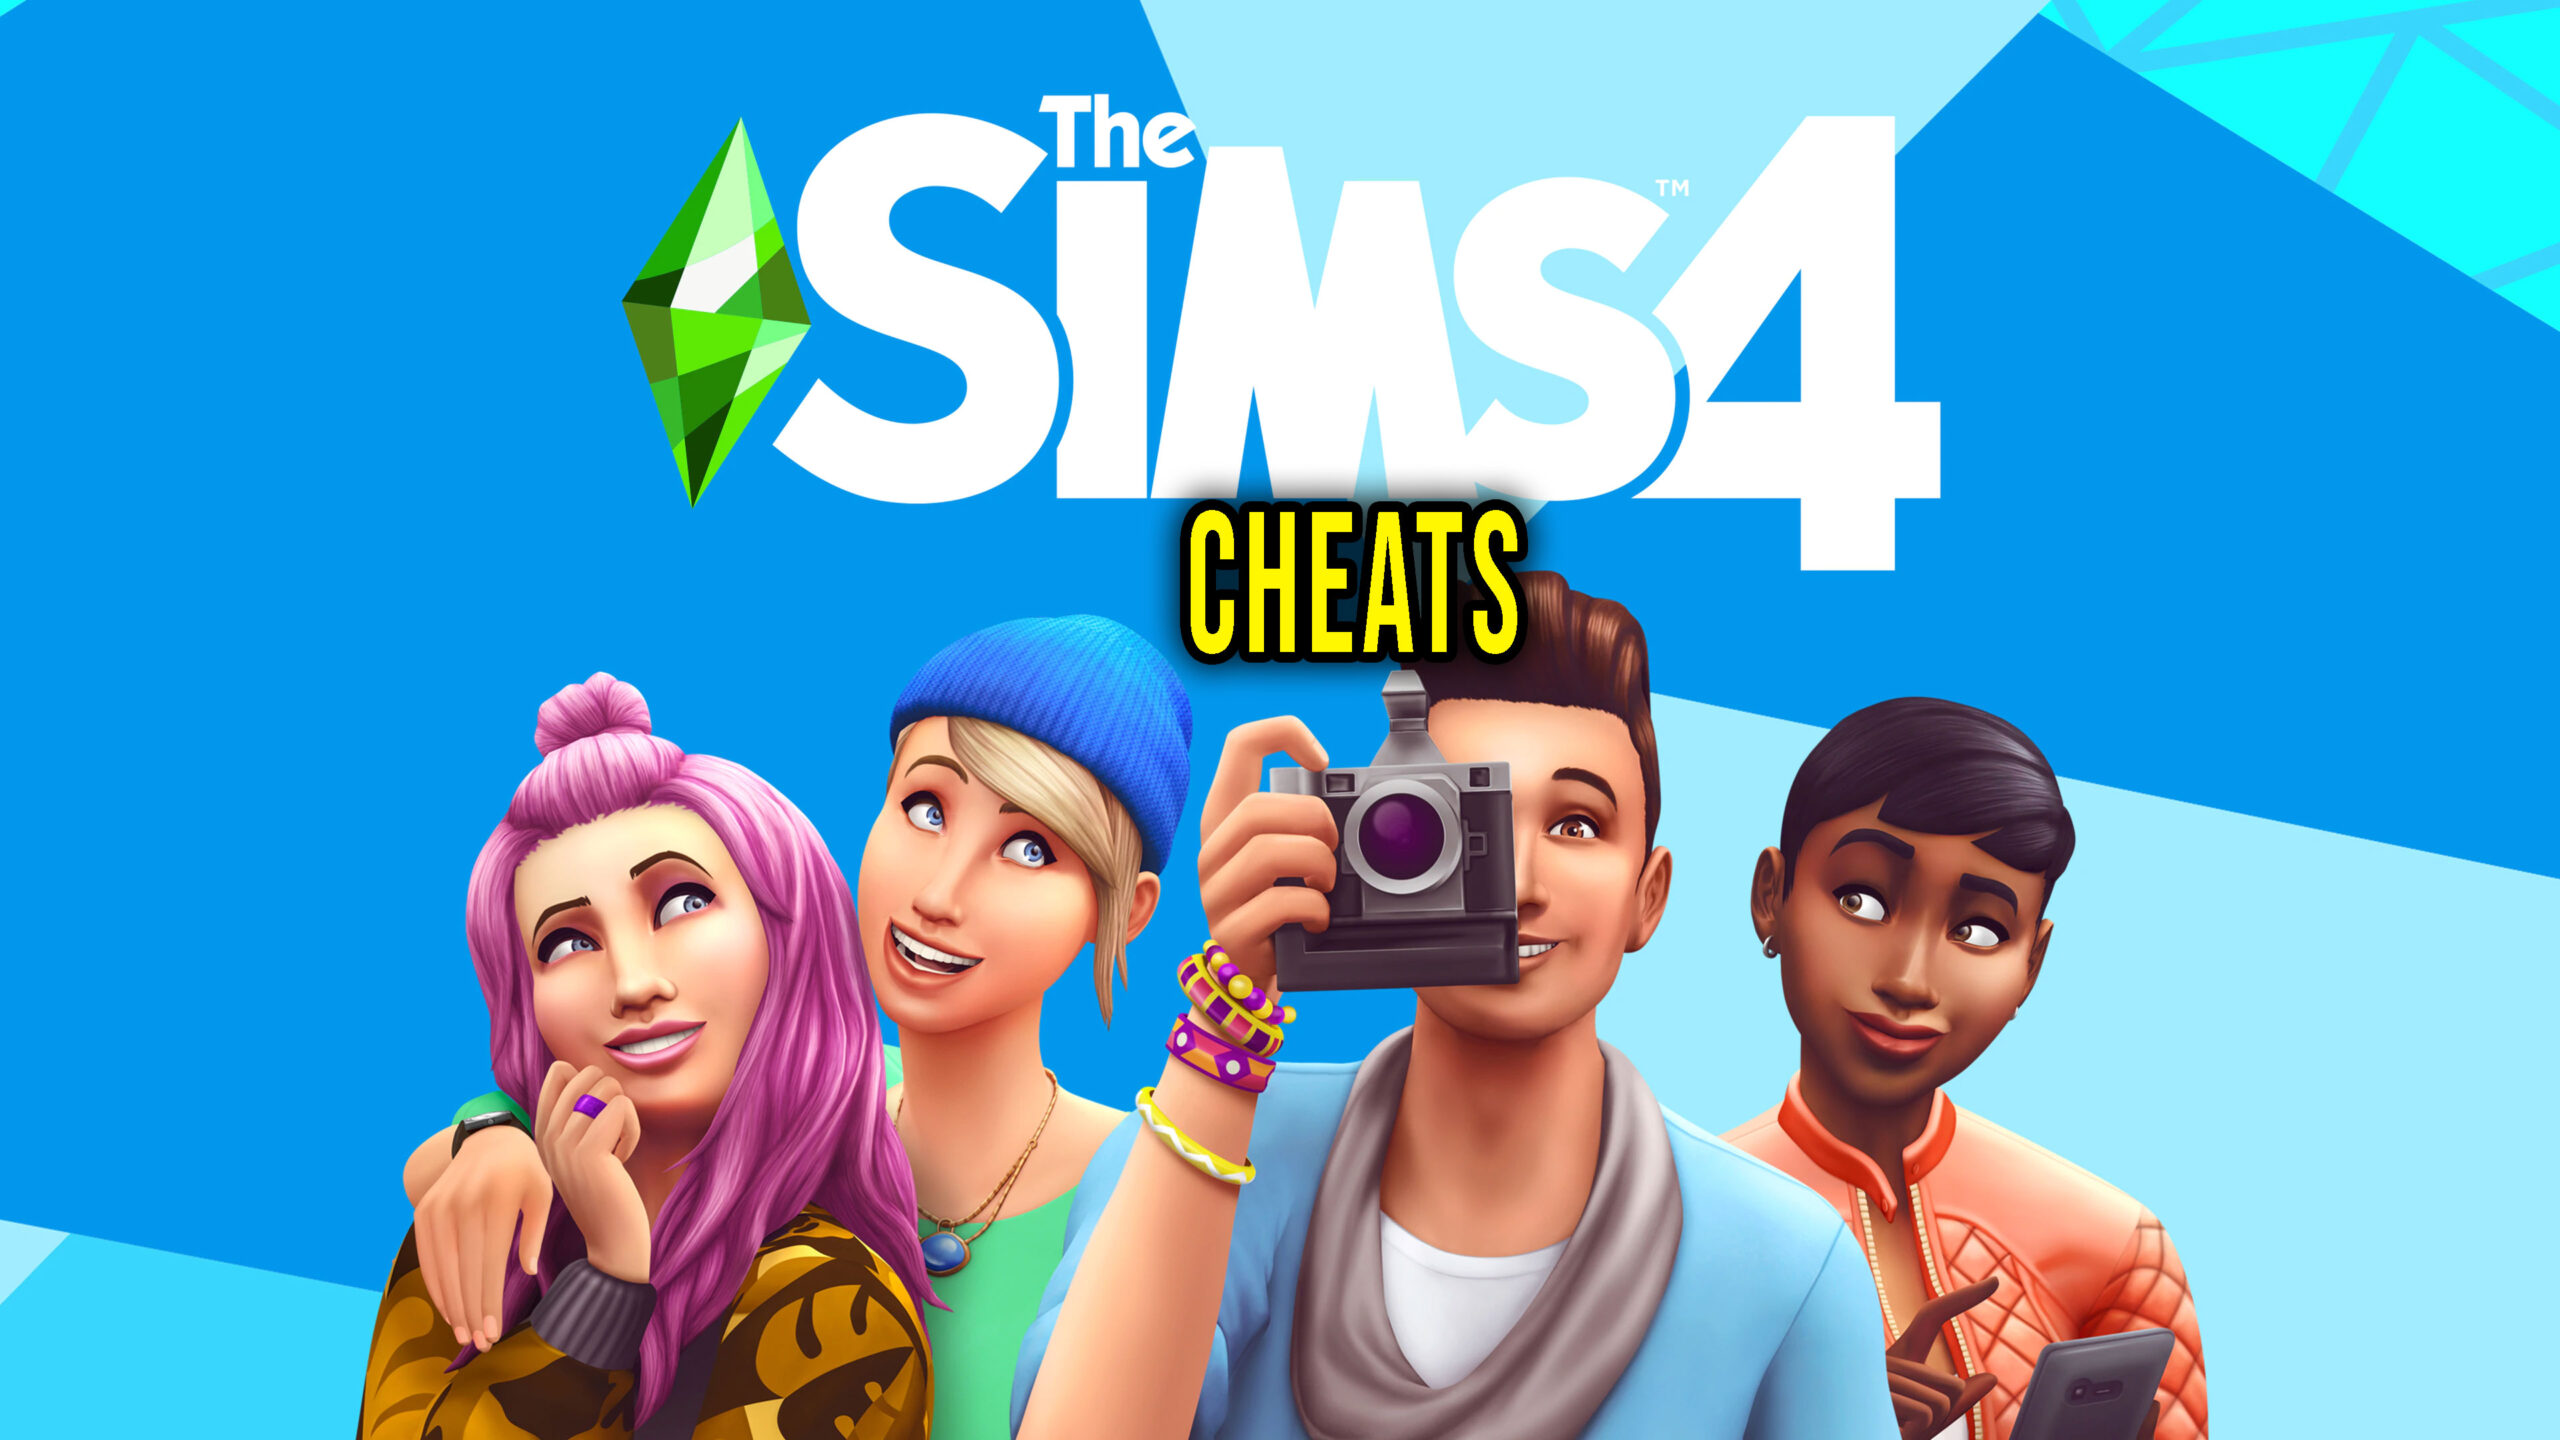 The Sims 4 Trainer - FearLess Cheat Engine